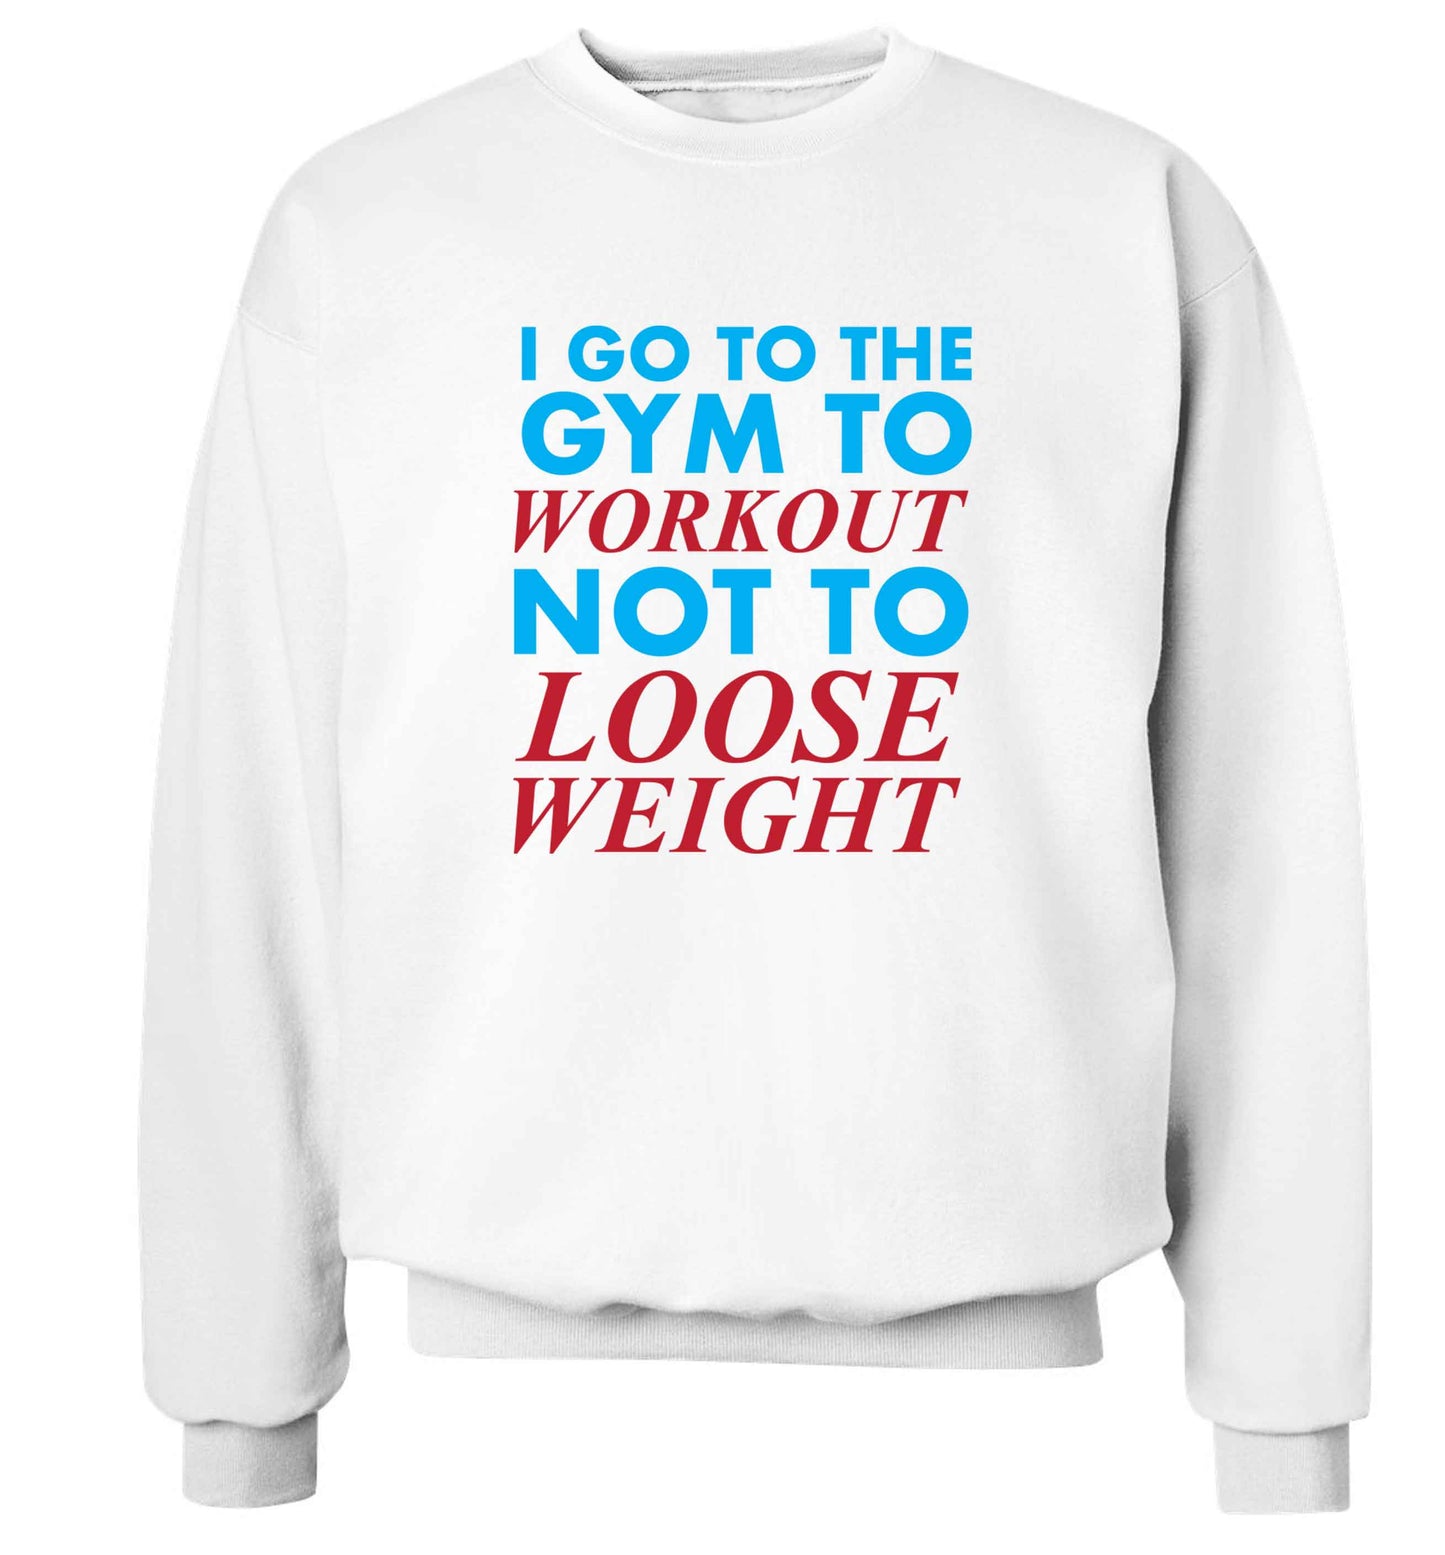 I go to the gym to workout not to loose weight adult's unisex white sweater 2XL